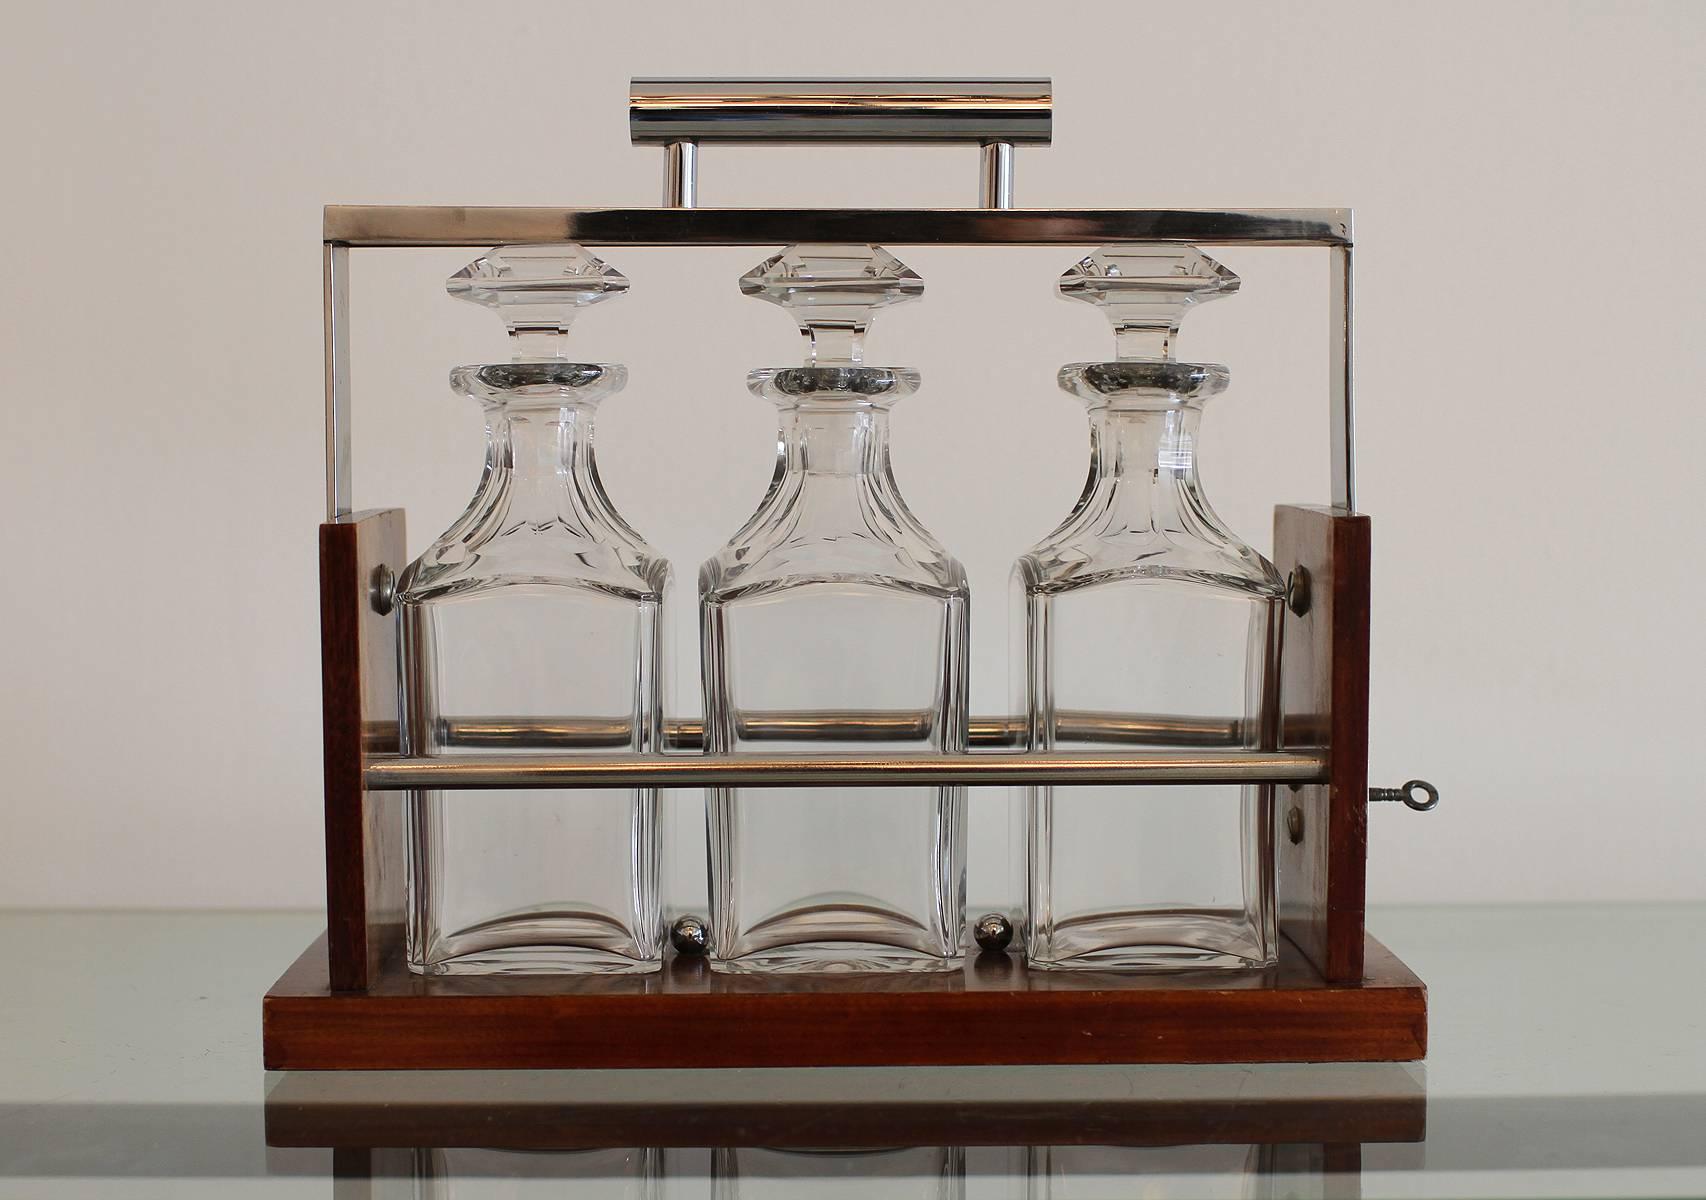 French Art Deco Tantalus decanter set attributed to ADNET, three crystal bottles enclosed in a burl Amboyna and chrome-plated frame.
A lock and a key allow to swing the handle to the back and release the bottles kept in place and secure.
Original